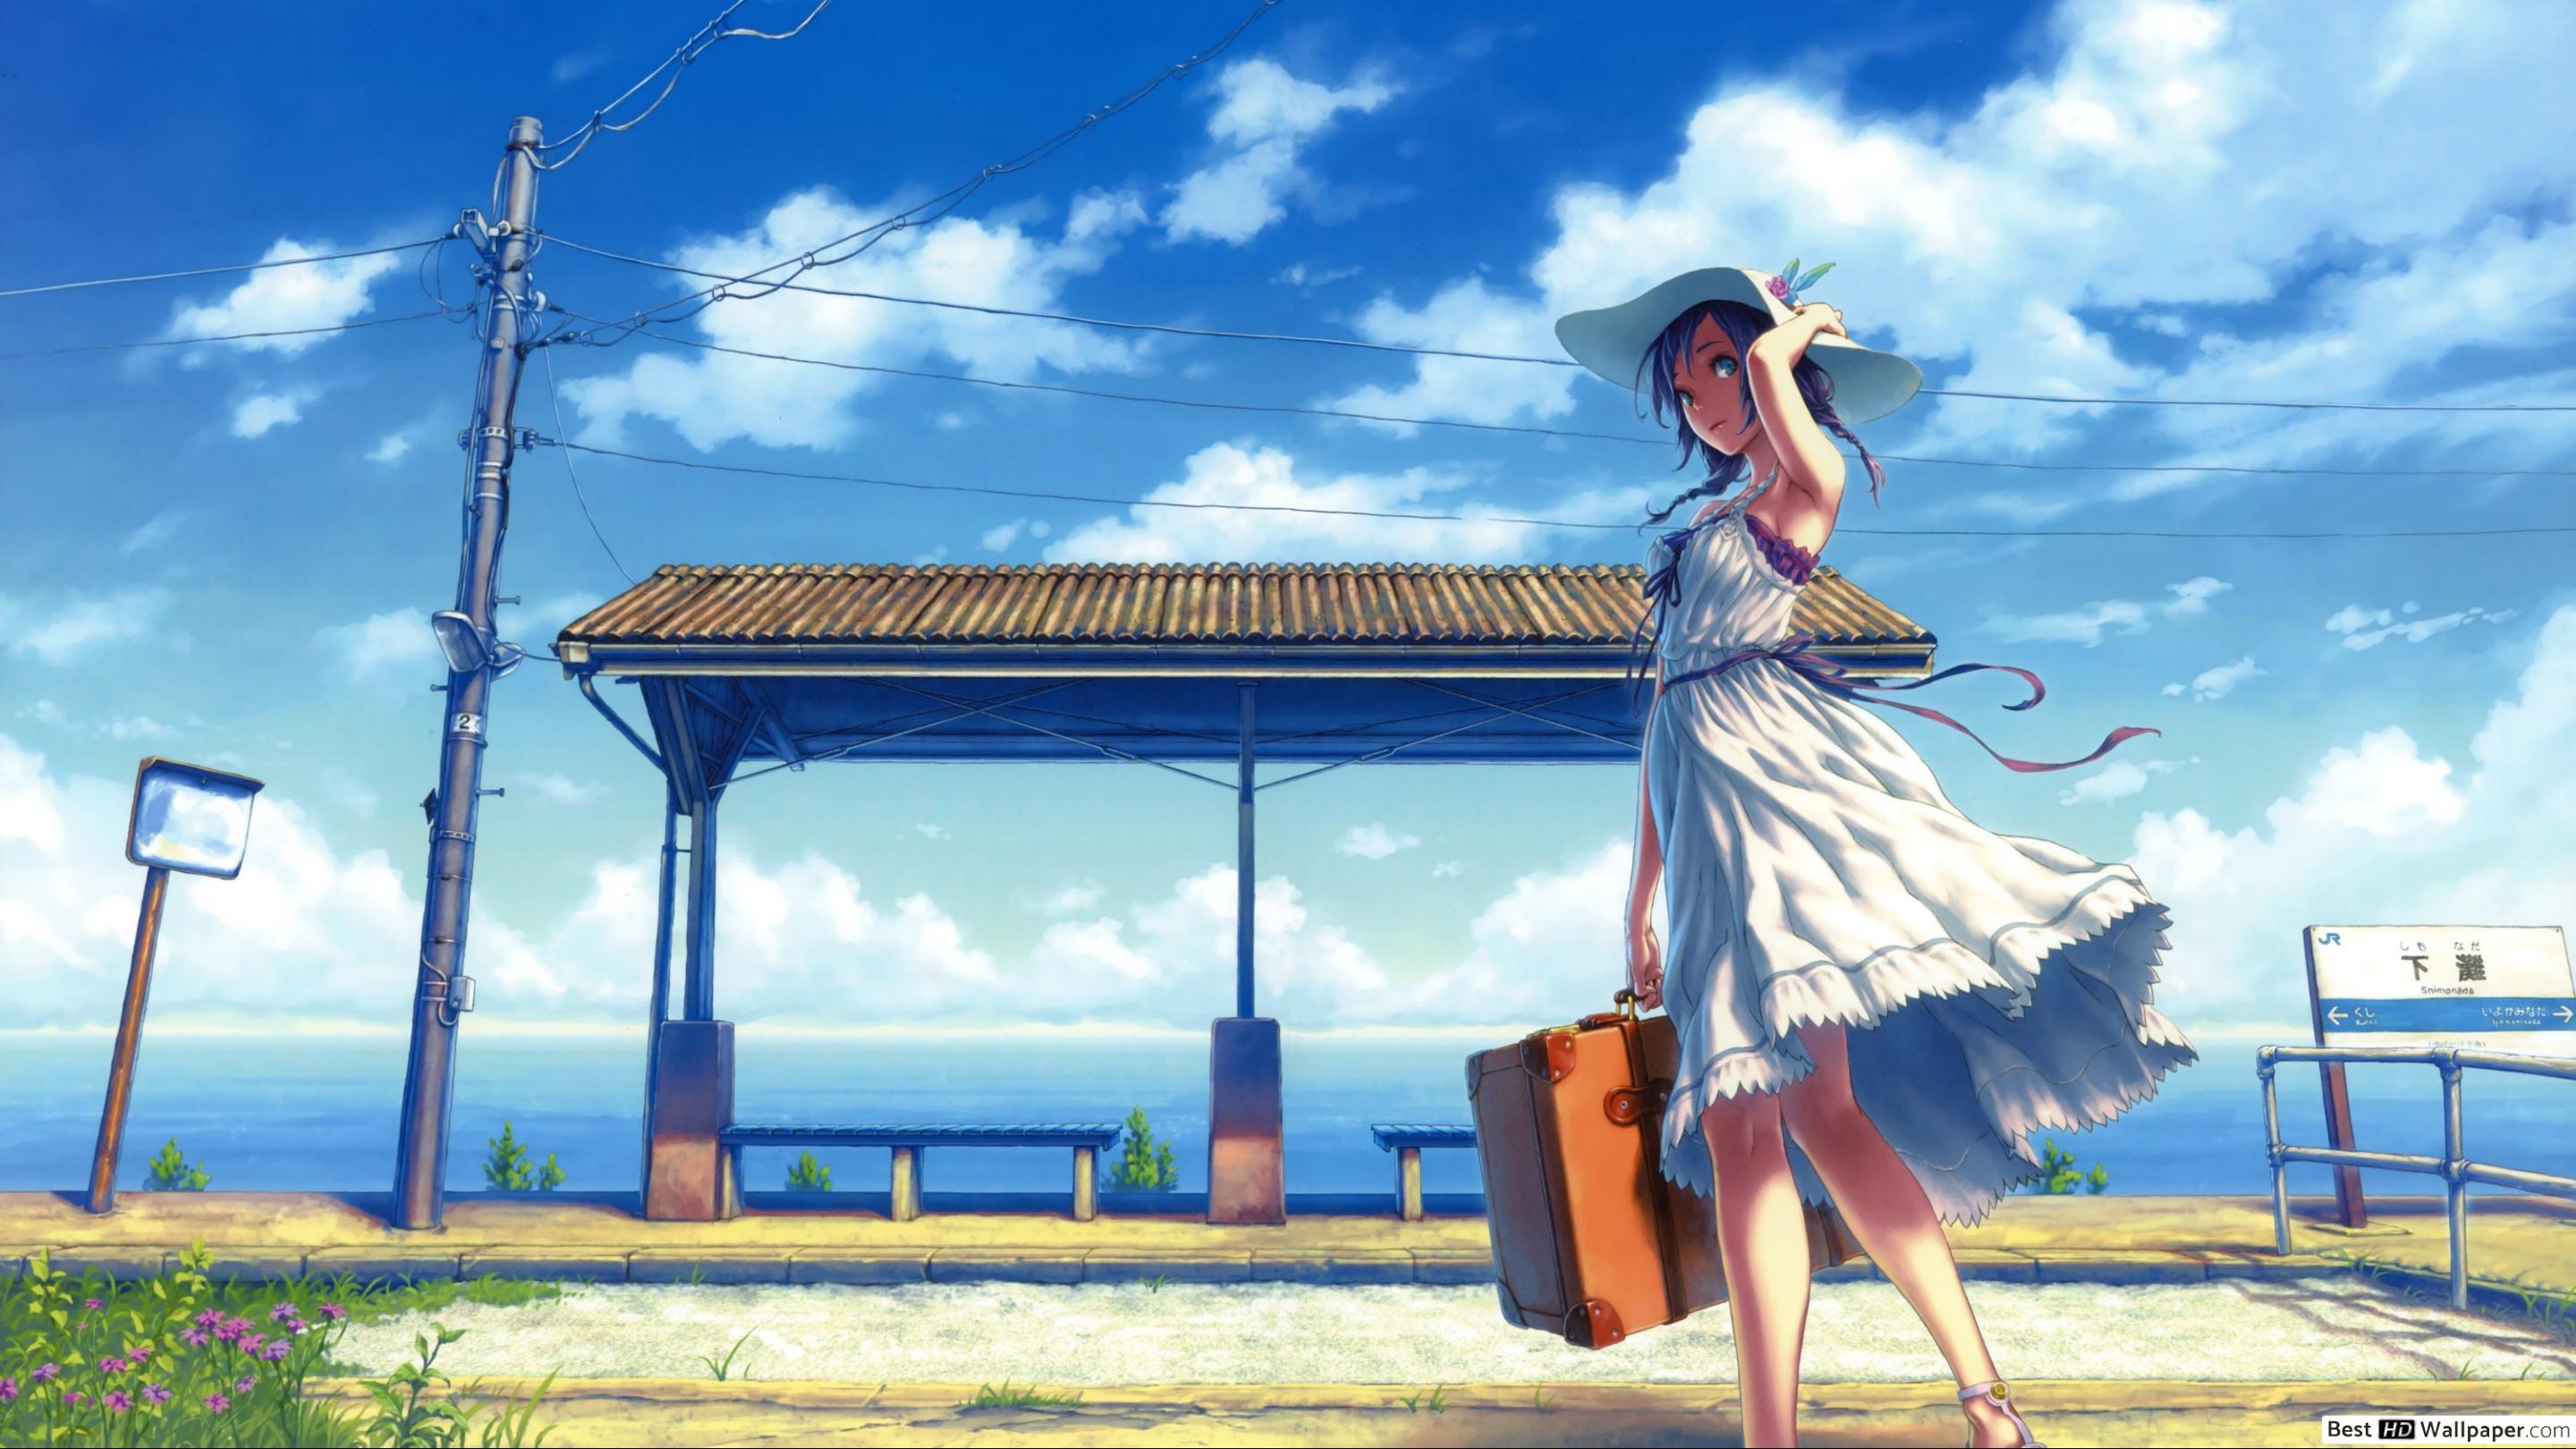 Anime Girl In Sunny Weather Wallpapers